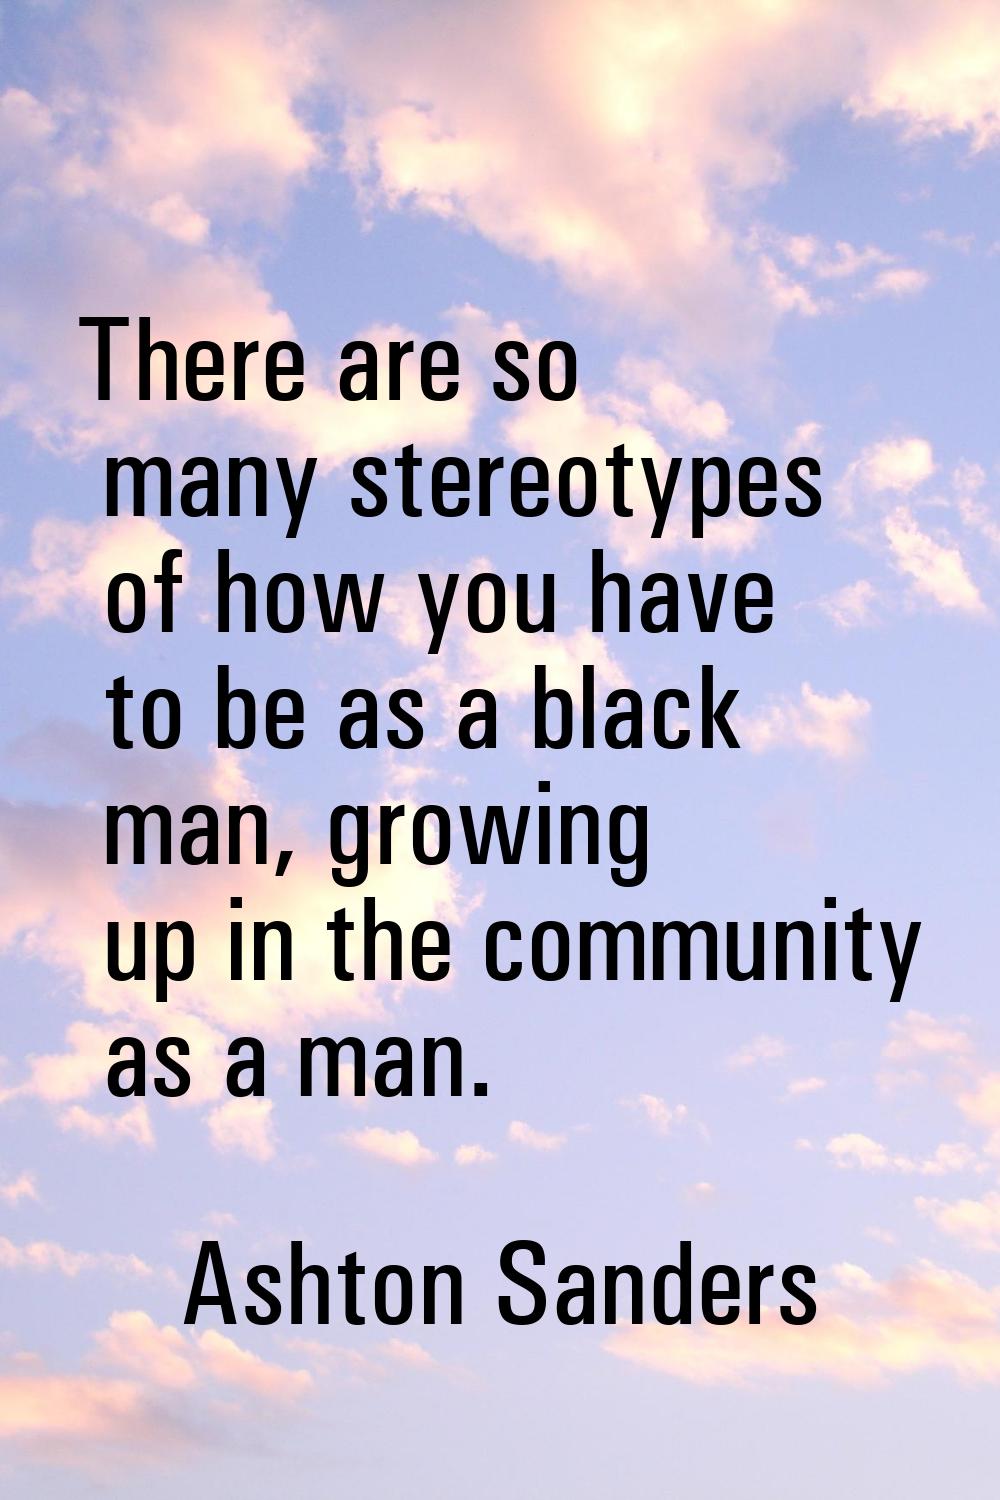 There are so many stereotypes of how you have to be as a black man, growing up in the community as 